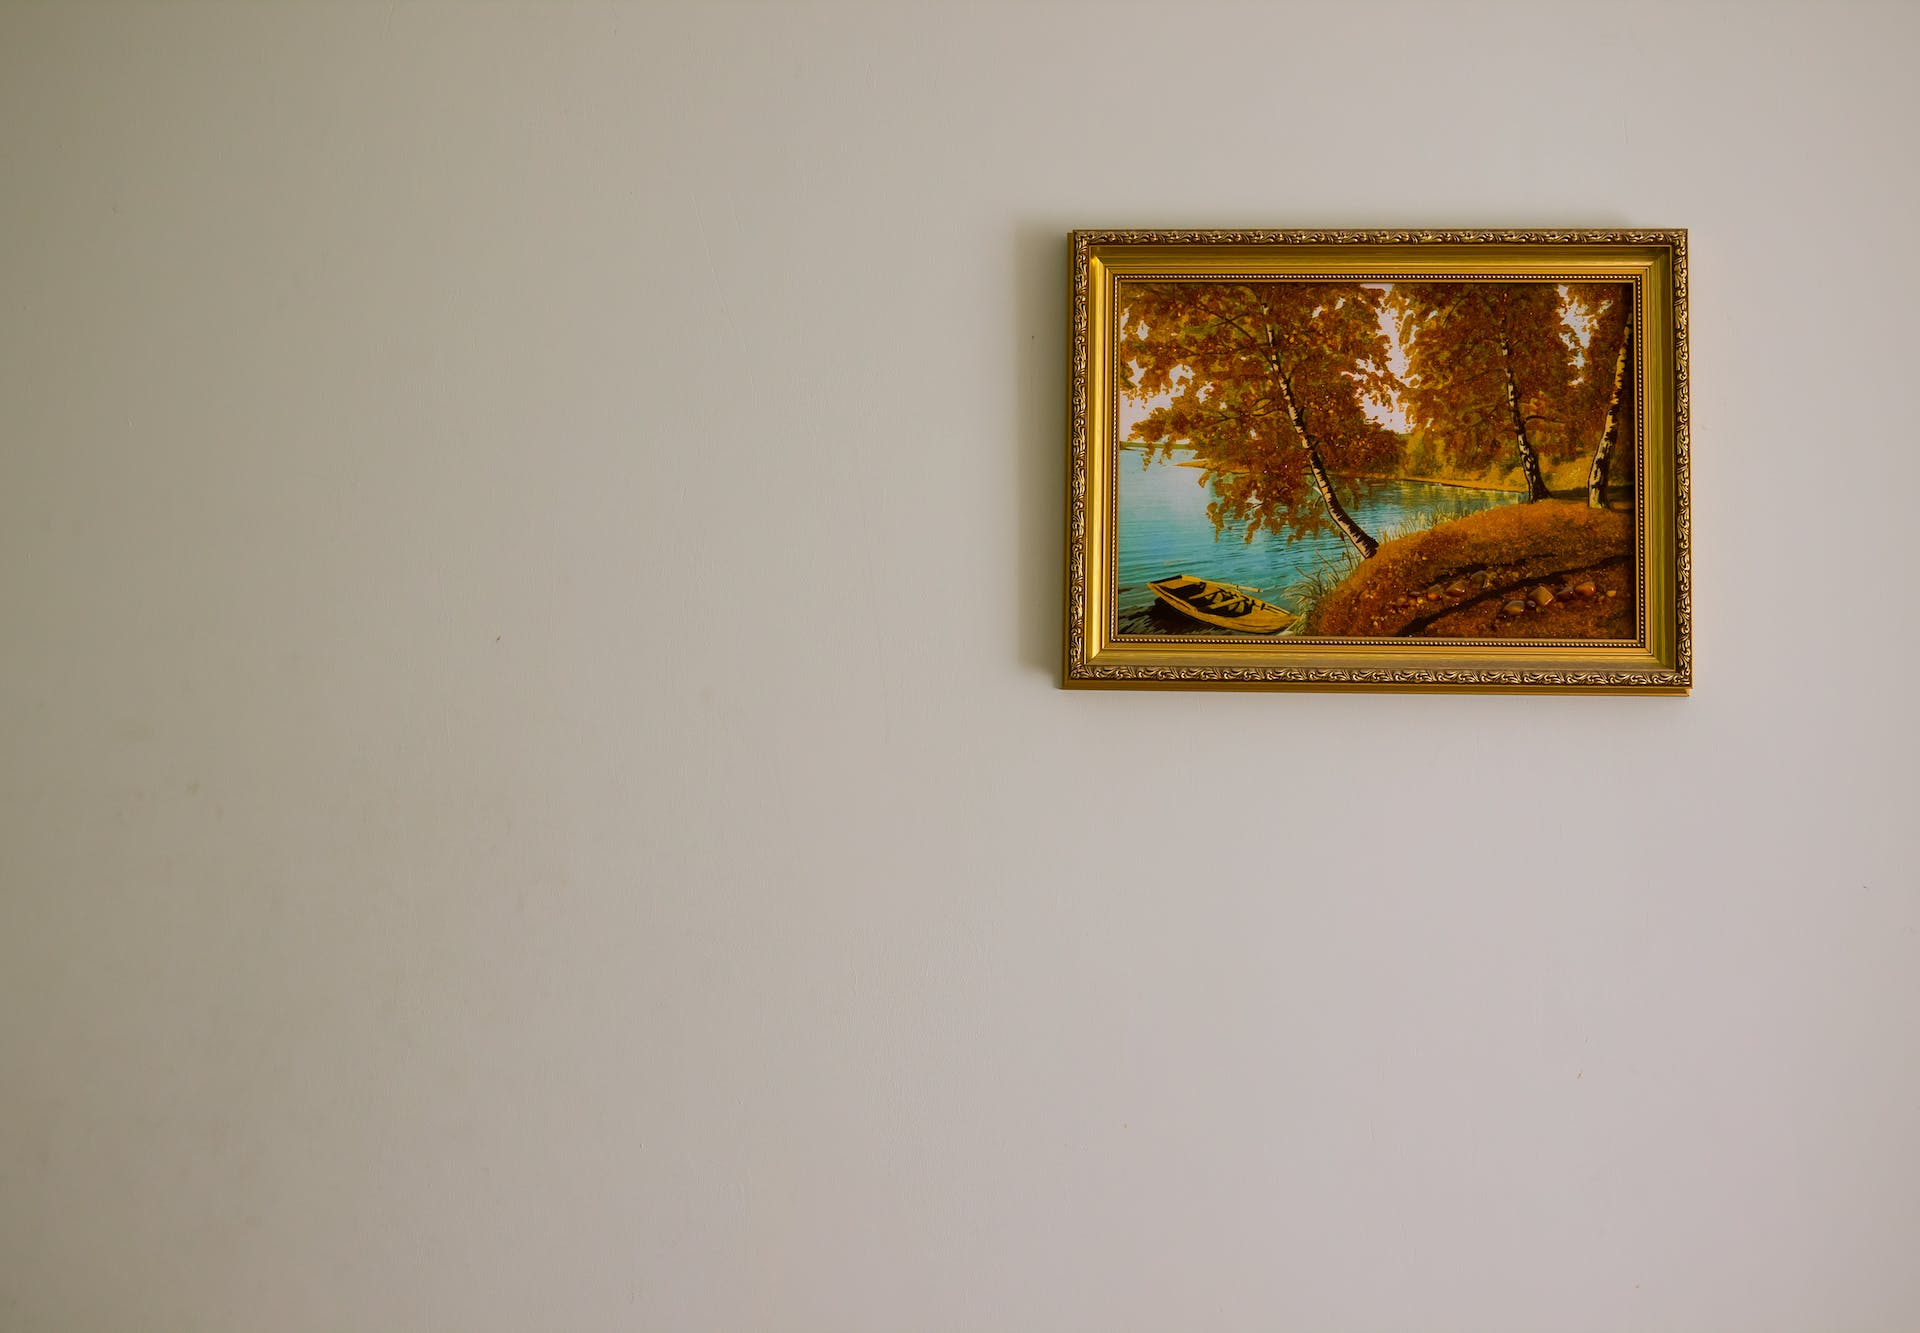 A painting on a wall | Source: Pexels